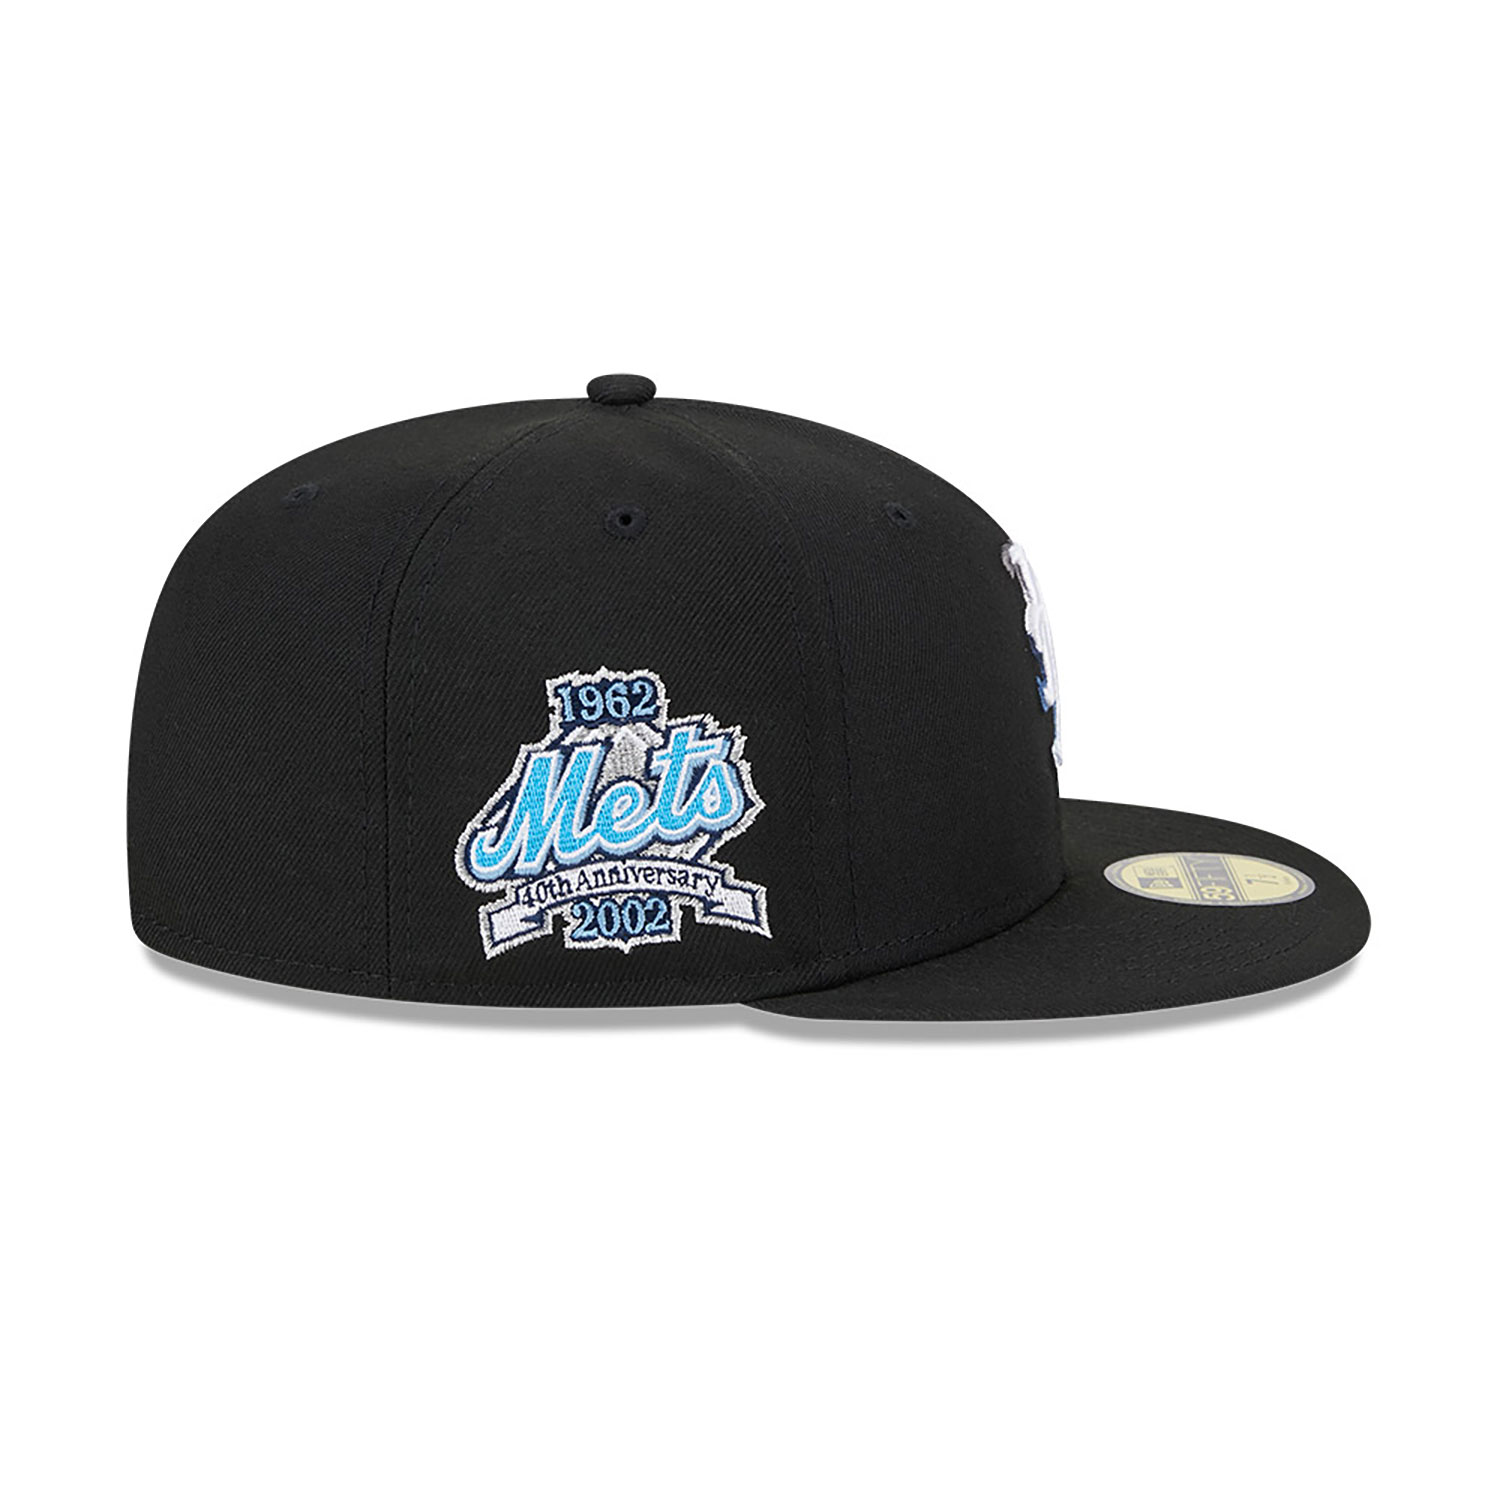 New York Mets Raceway Black 59FIFTY Fitted Cap